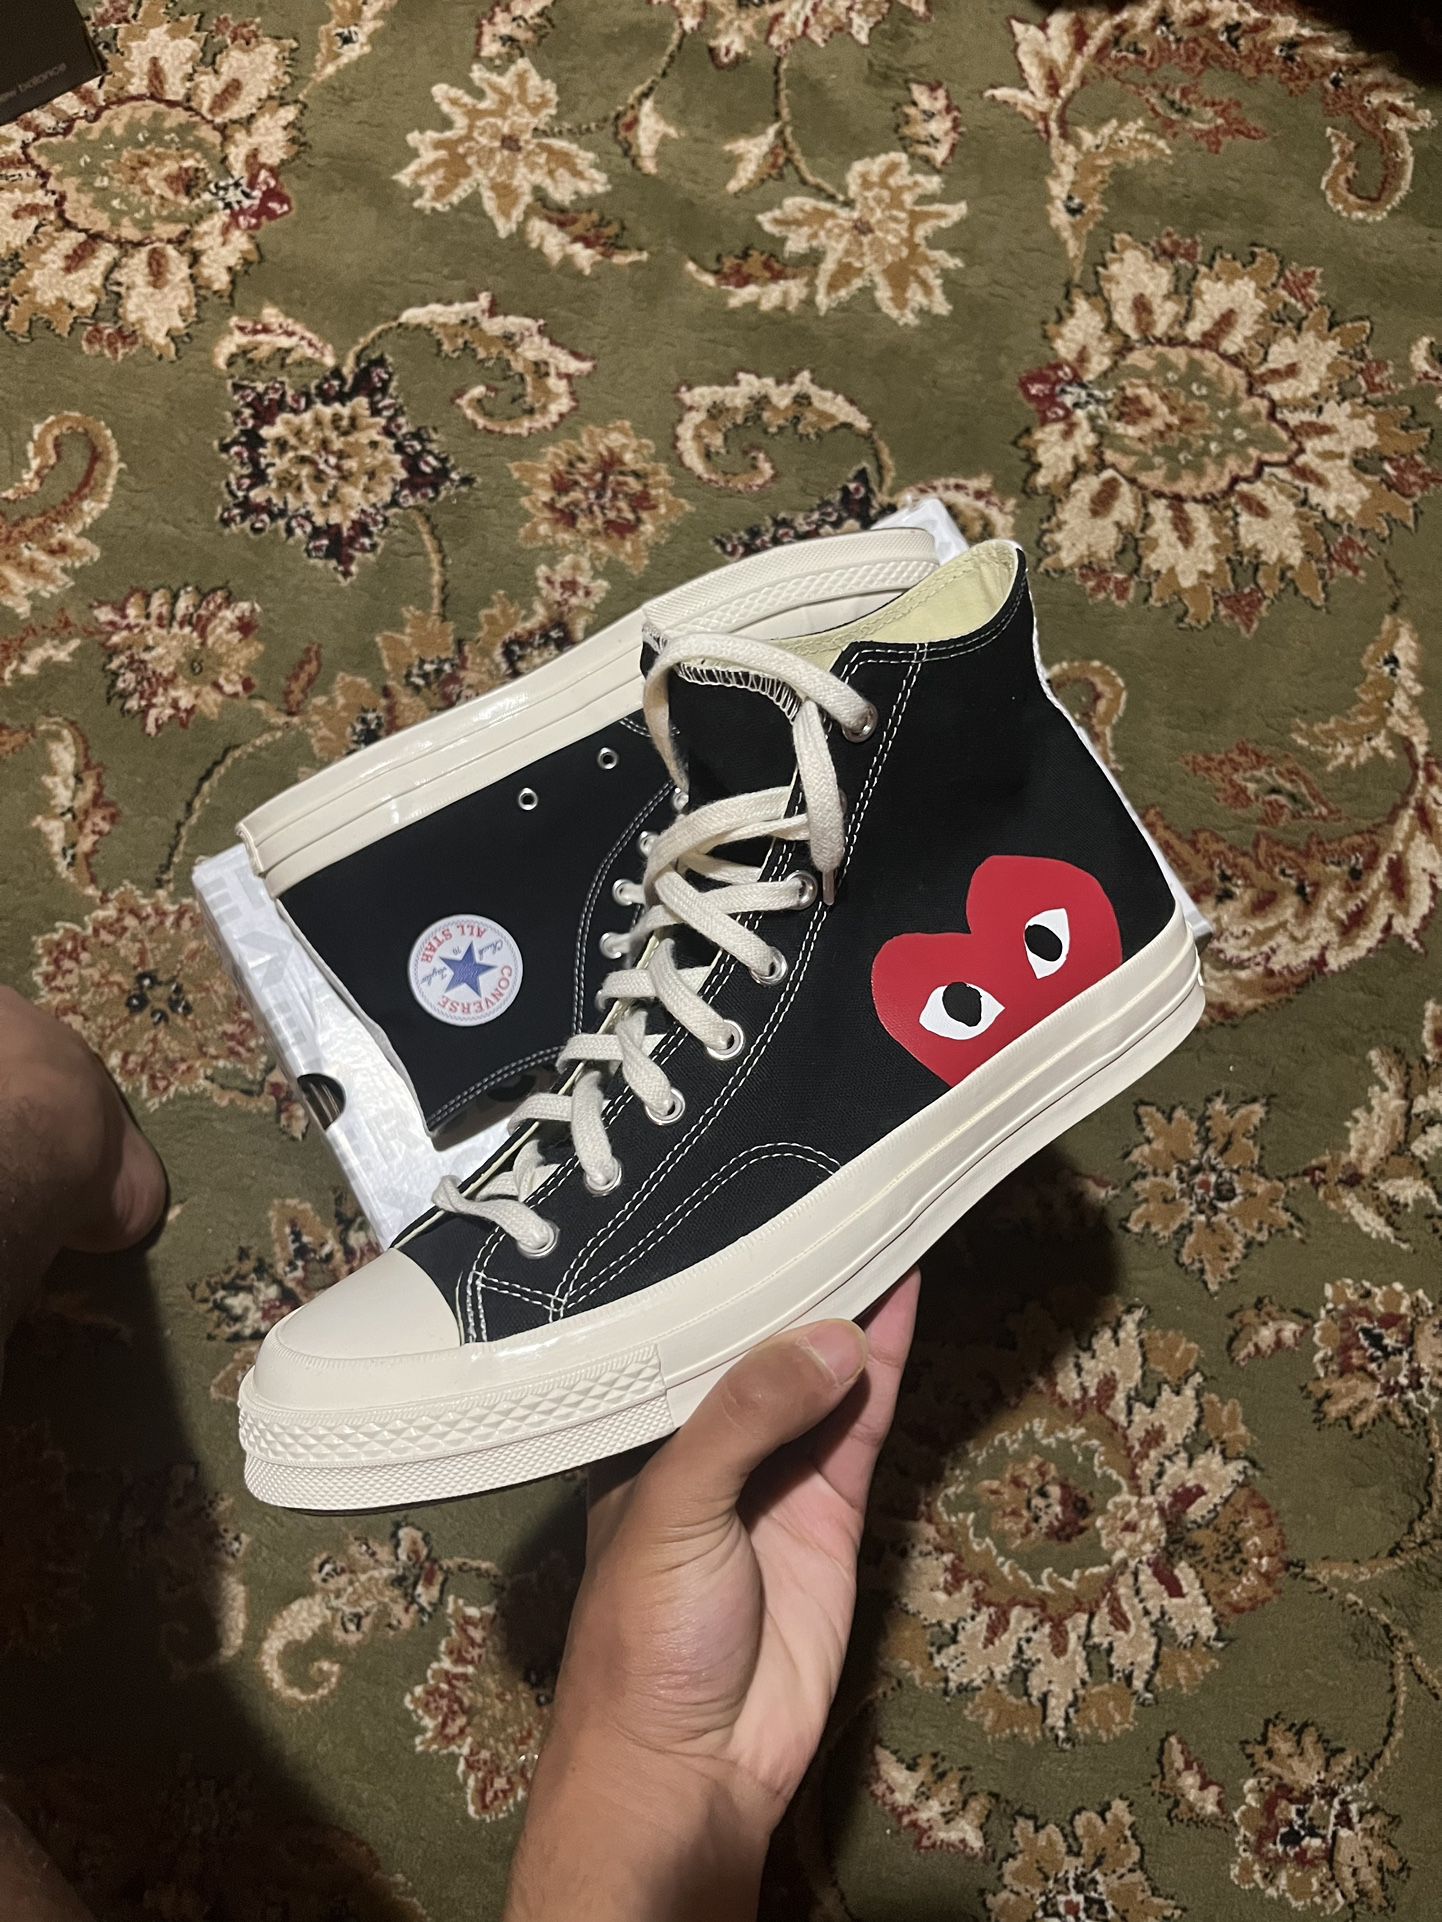 Cdg converse High tops for Sale in MD -